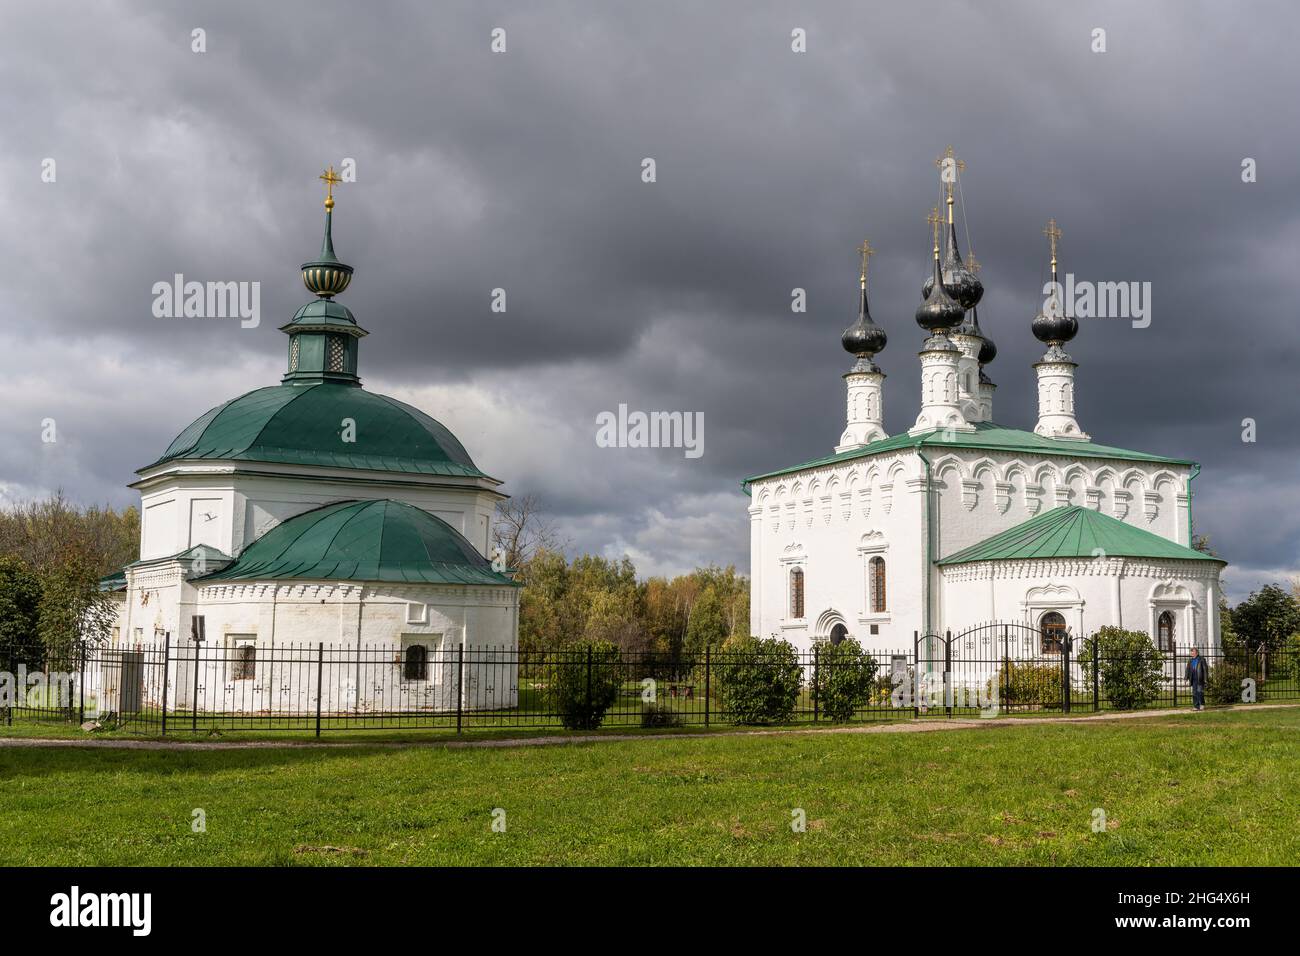 Suzdal, Russia - September 24, 2019: White Palm Sunday church on a autumn day with cloudy sky, republika Tartastan, Russia. Stock Photo